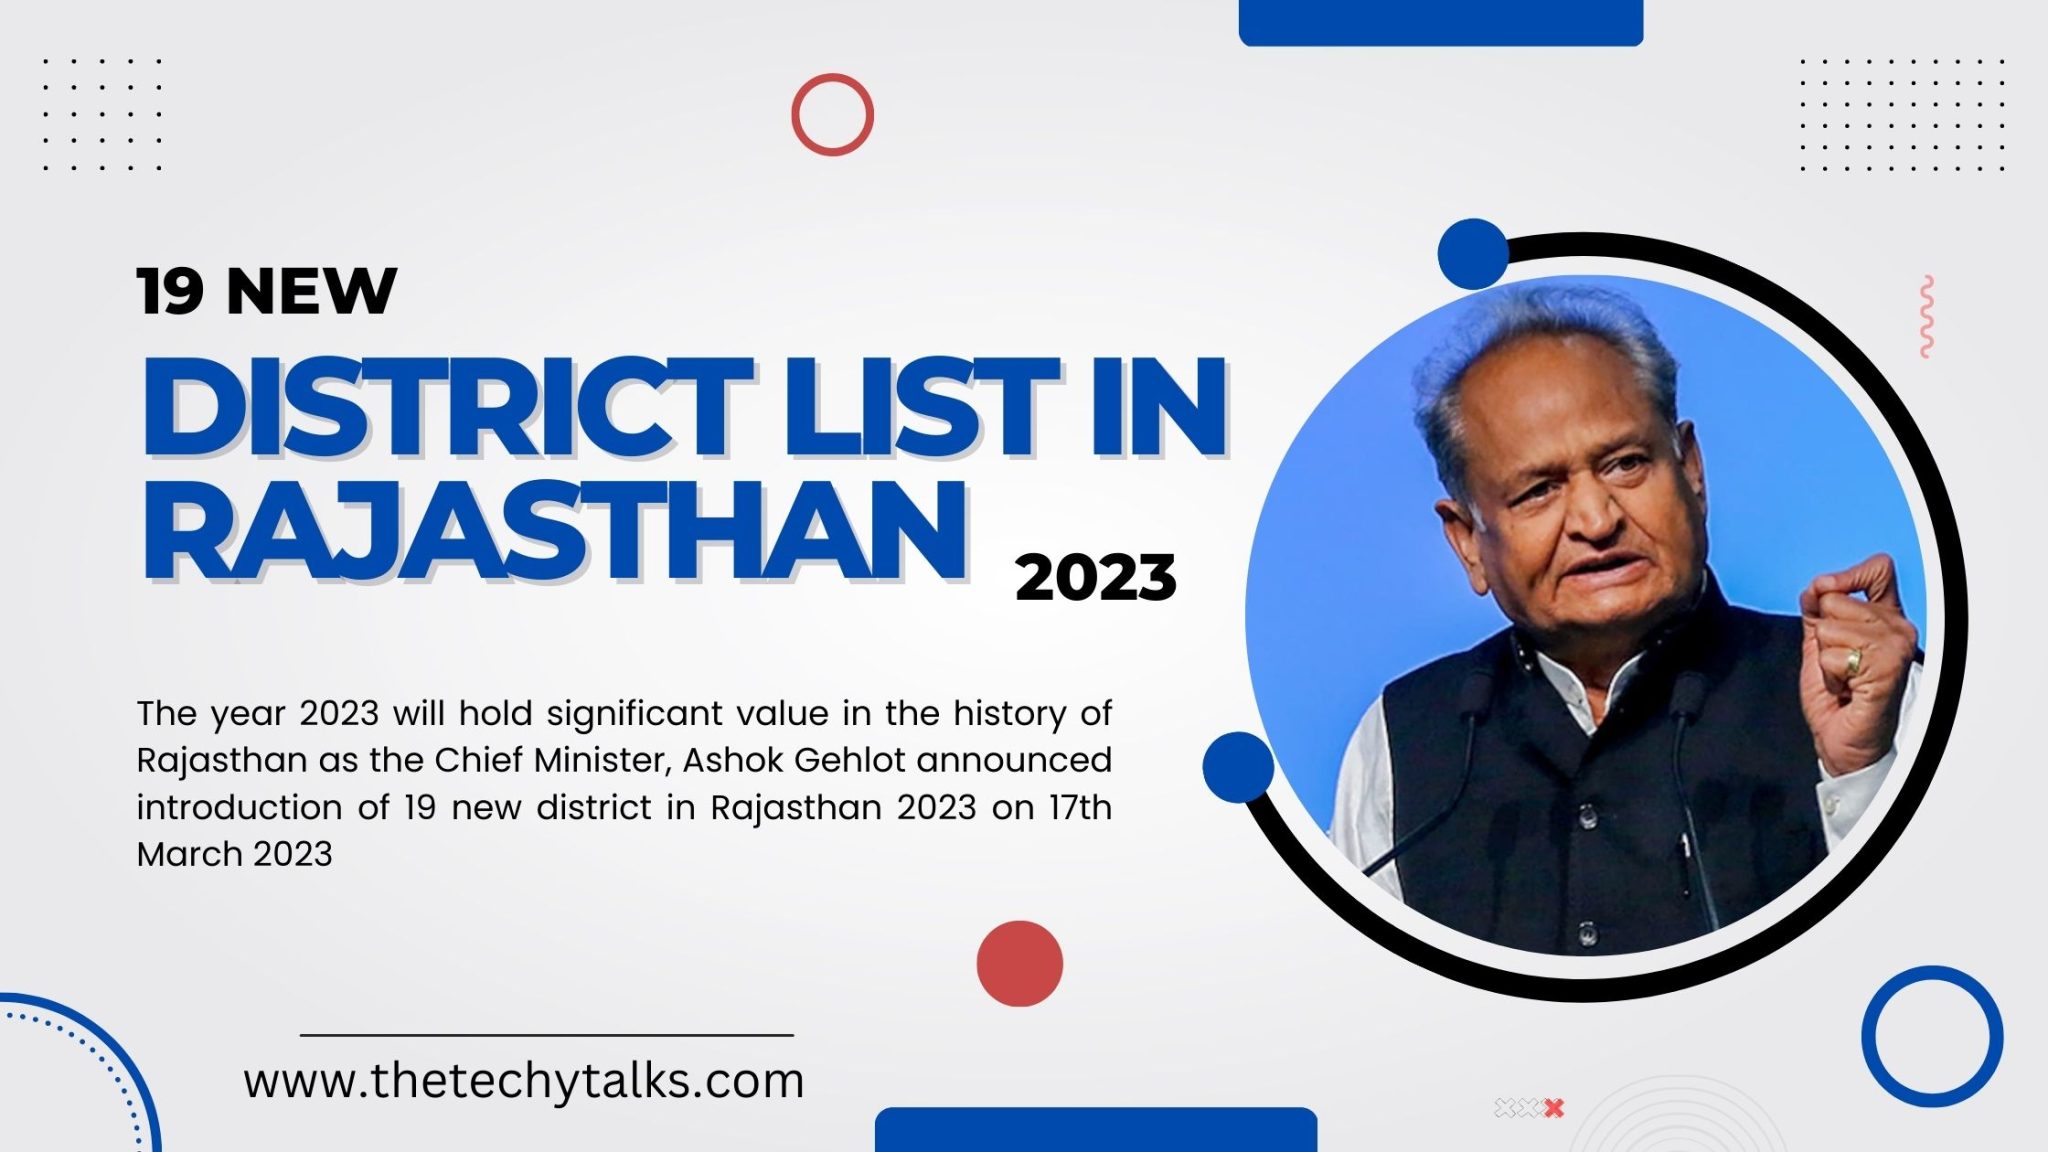 19 New District List in Rajasthan 2023 | Ashok Gehlot Announced New District